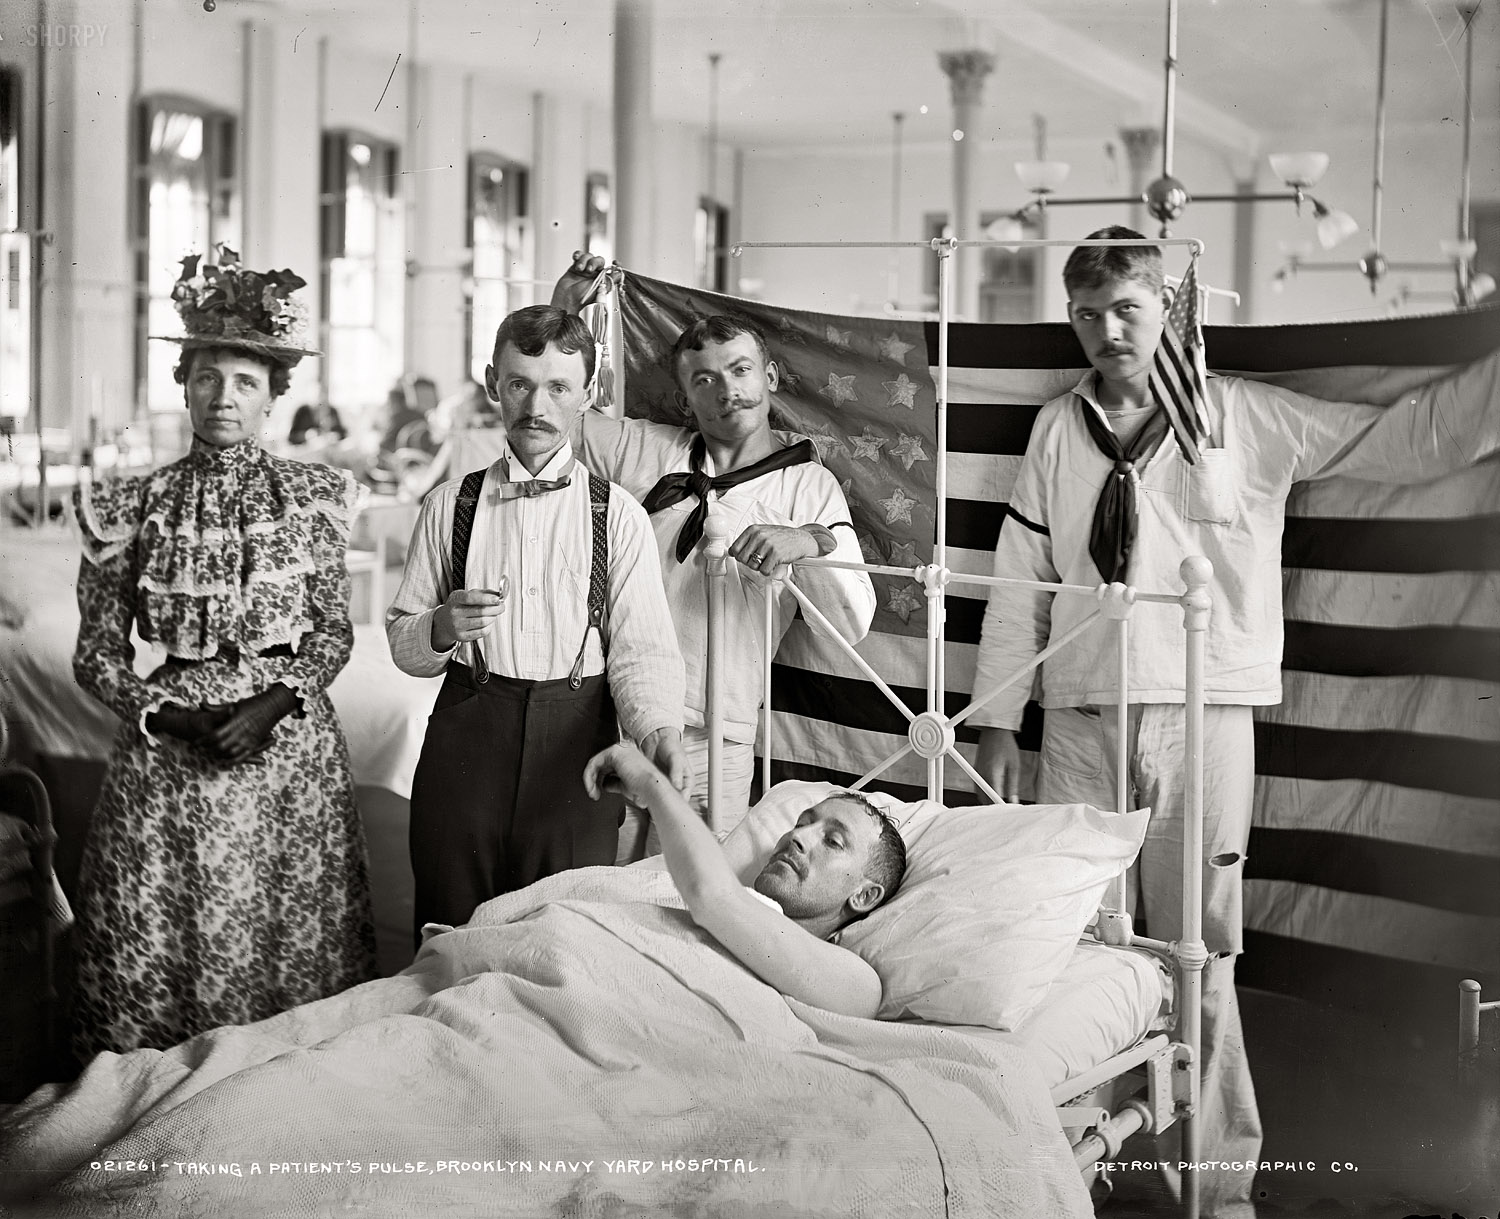 New York circa 1901. "Taking a patient's pulse, Brooklyn Navy Yard Hospital." Detroit Publishing Company glass negative. View full size.